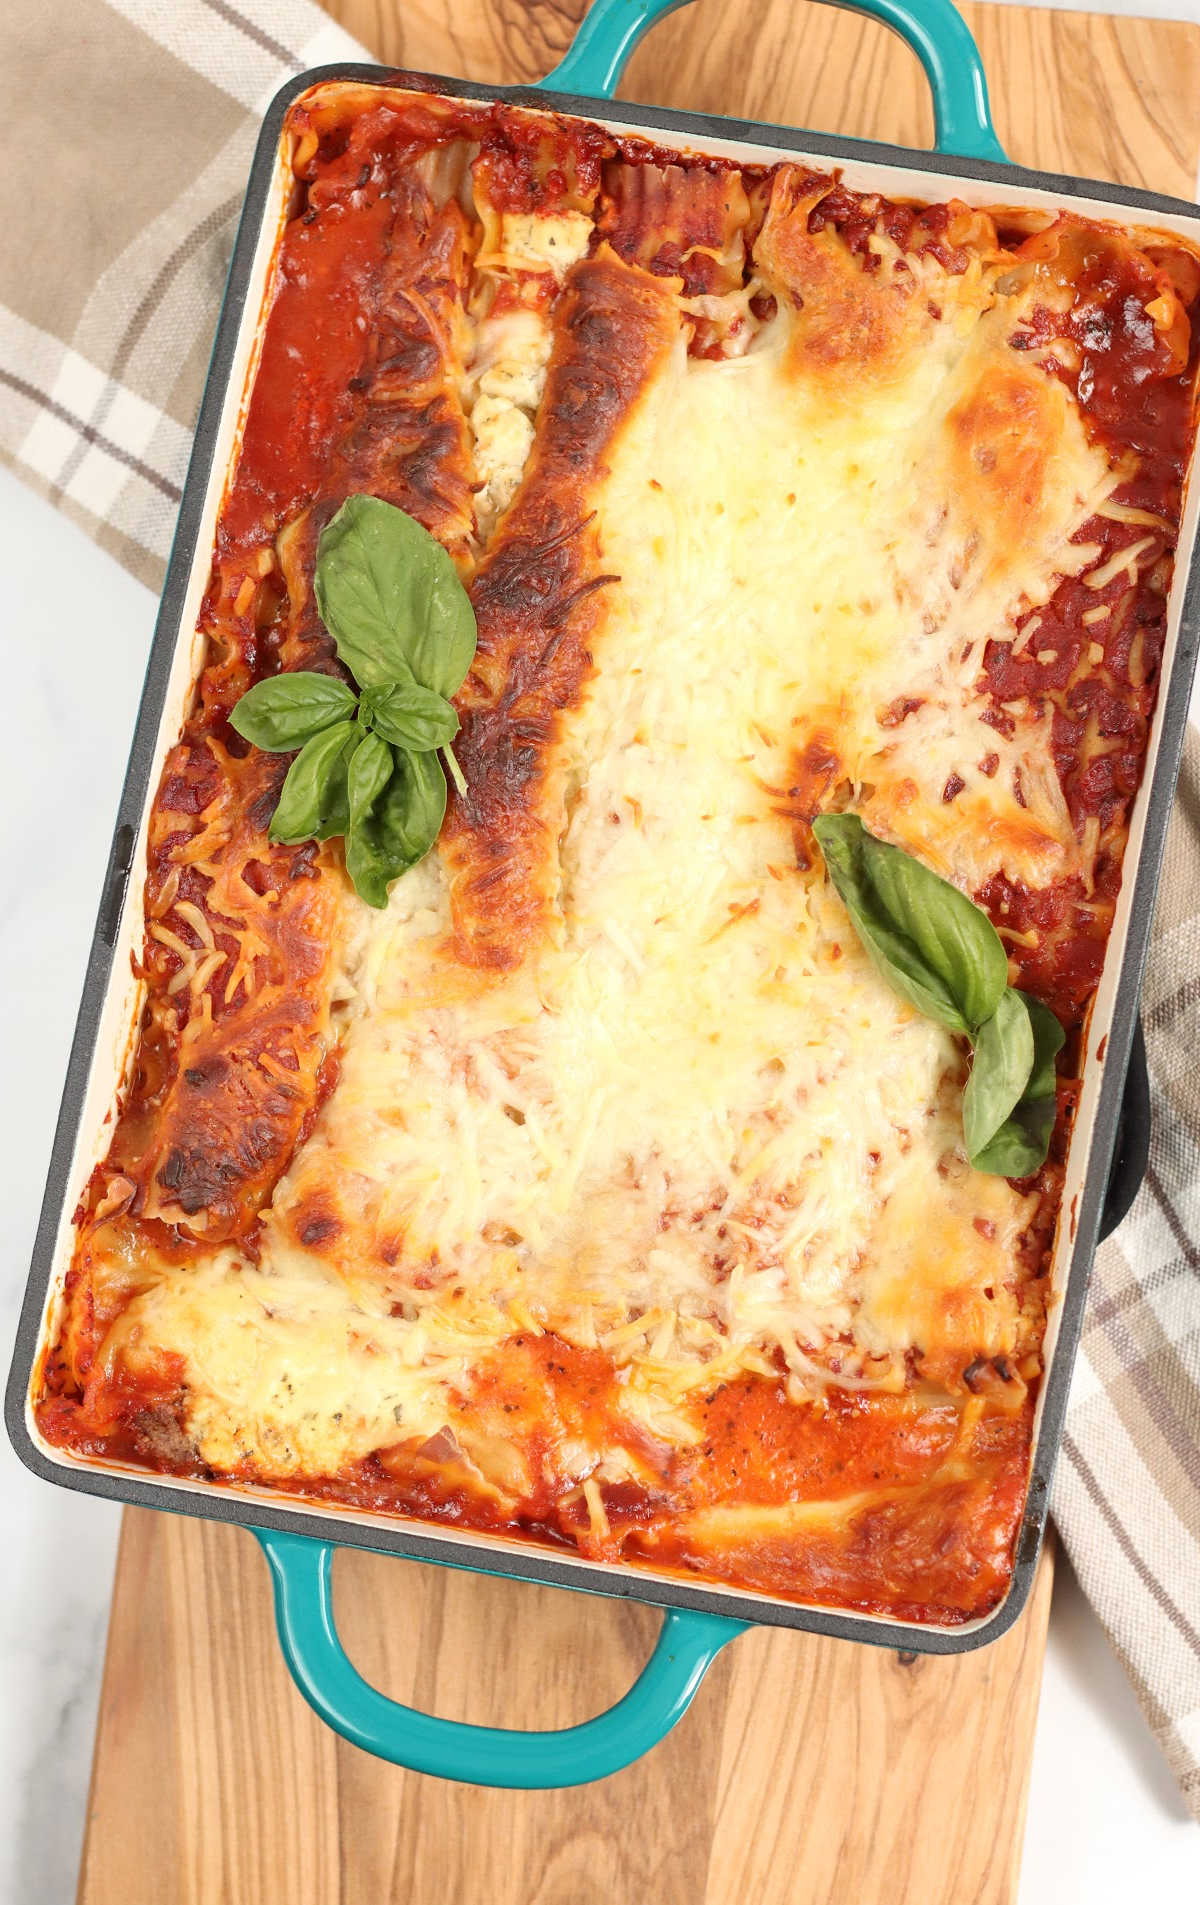 Meat lasagna with golden browned cheese in teal cast iron rectangle baking pan.